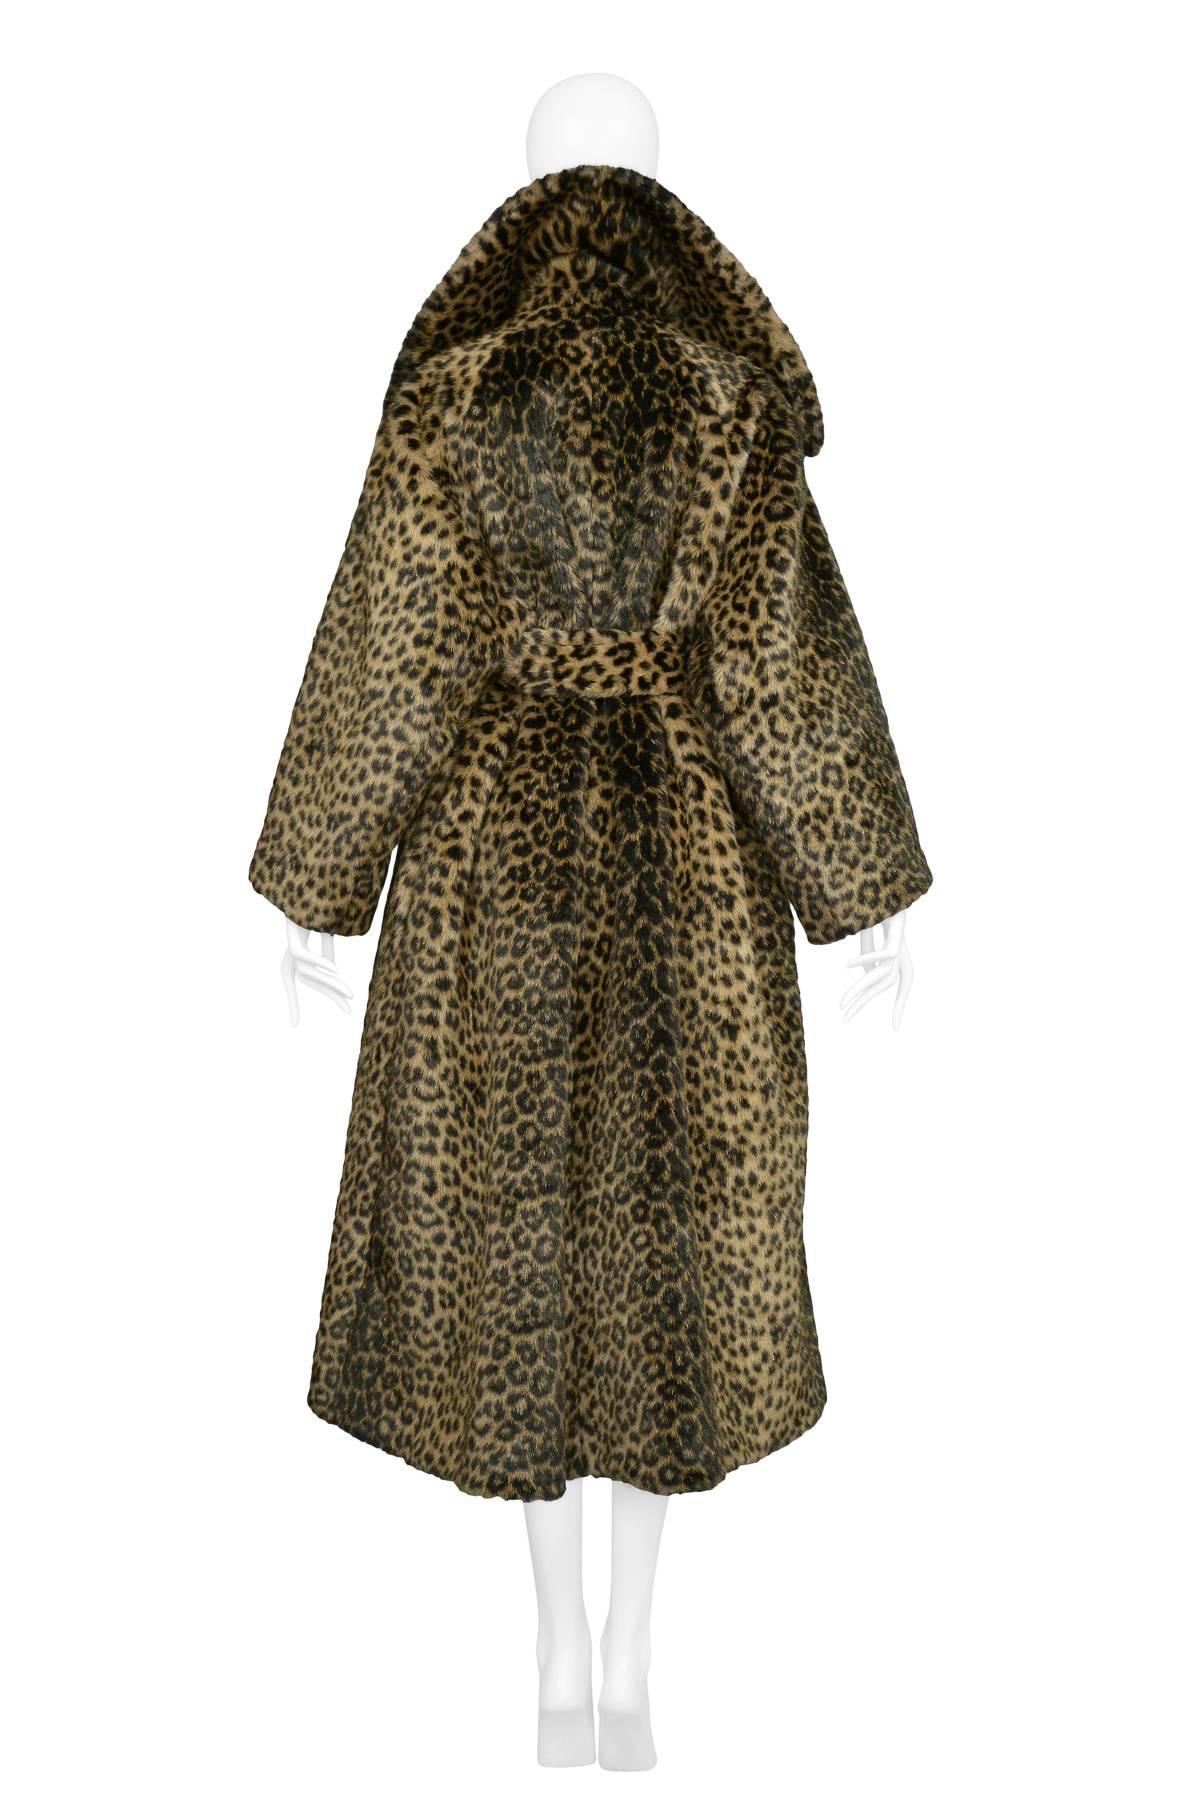 Iconic Alaia Leopard Faux Fur Coat 1991  In Excellent Condition In Los Angeles, CA